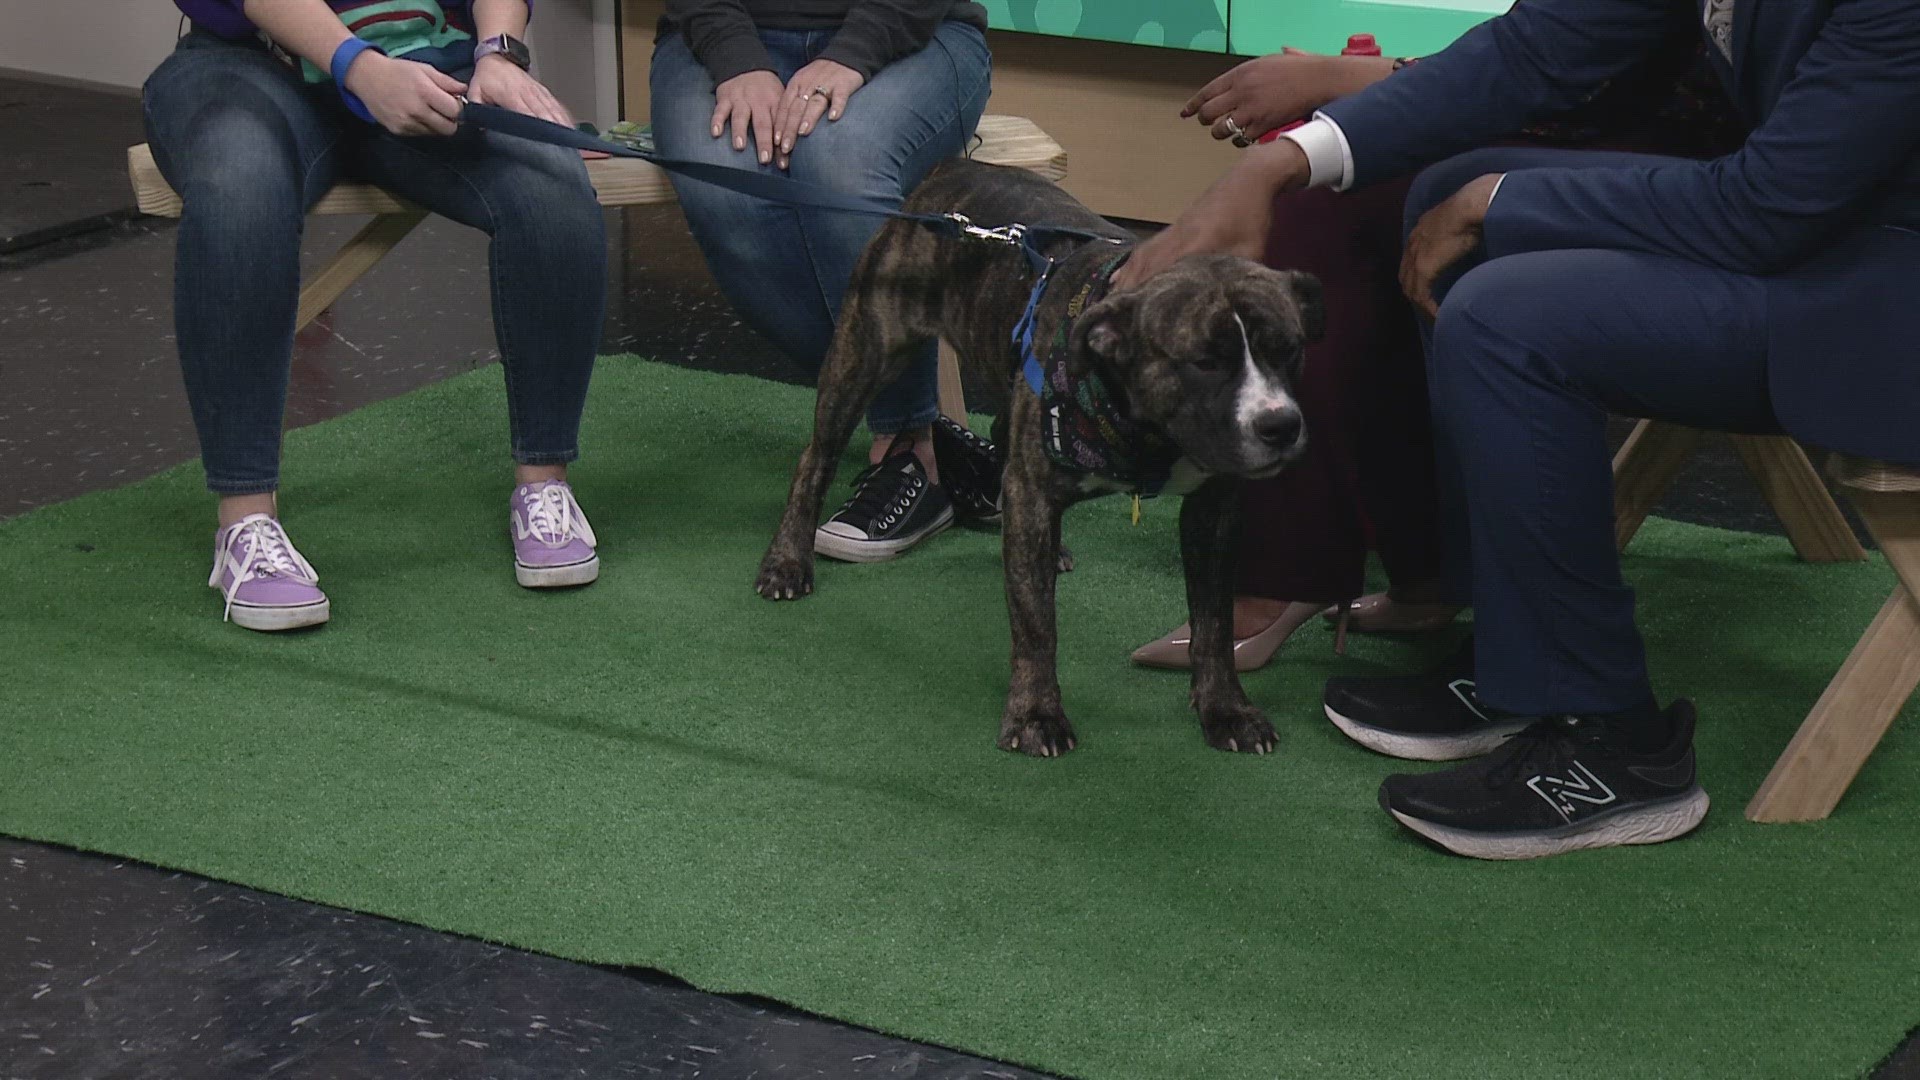 City Dogs Cleveland visited 3News on Sunday. Klondike is up for adoption from City Dogs Cleveland.